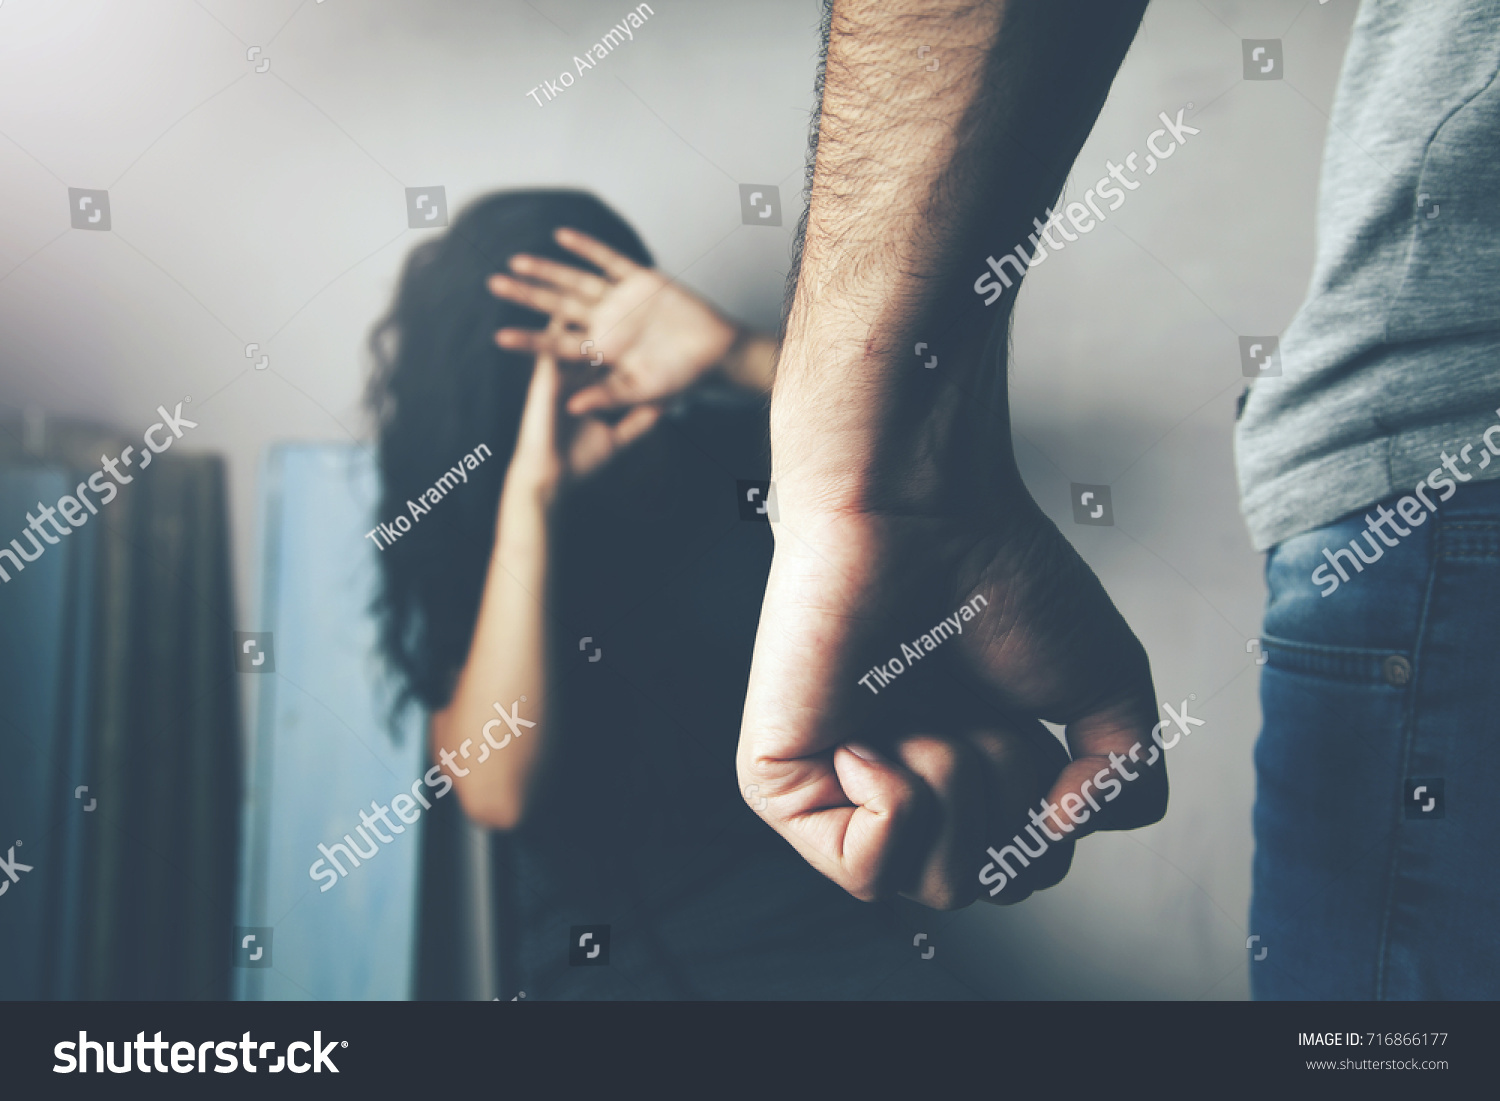 Man beating up his wife illustrating domestic violence #716866177